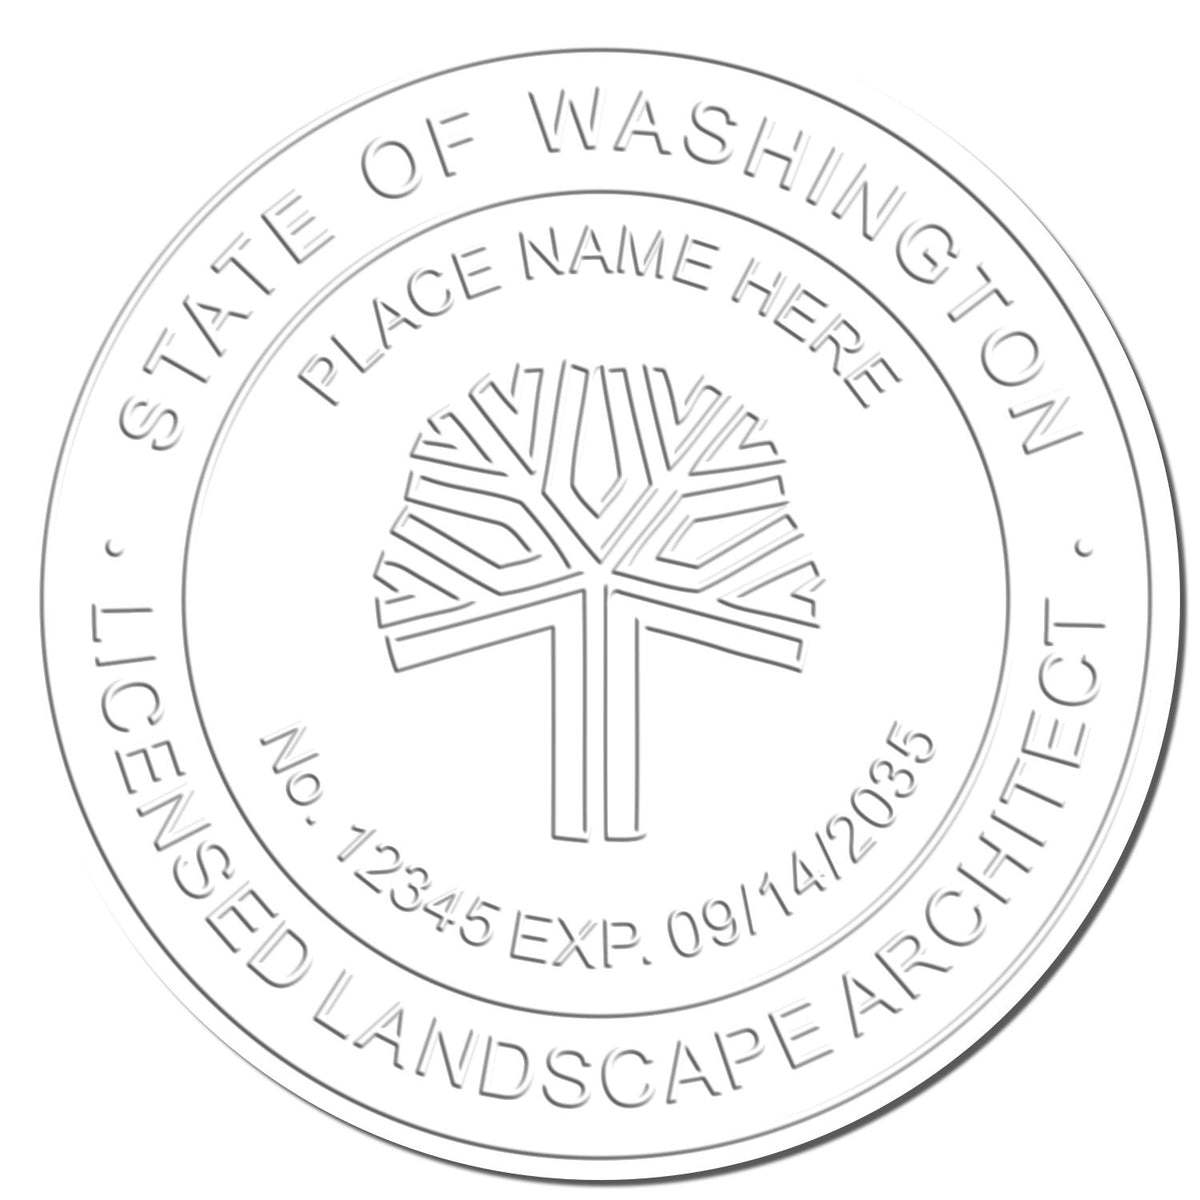 This paper is stamped with a sample imprint of the Hybrid Washington Landscape Architect Seal, signifying its quality and reliability.